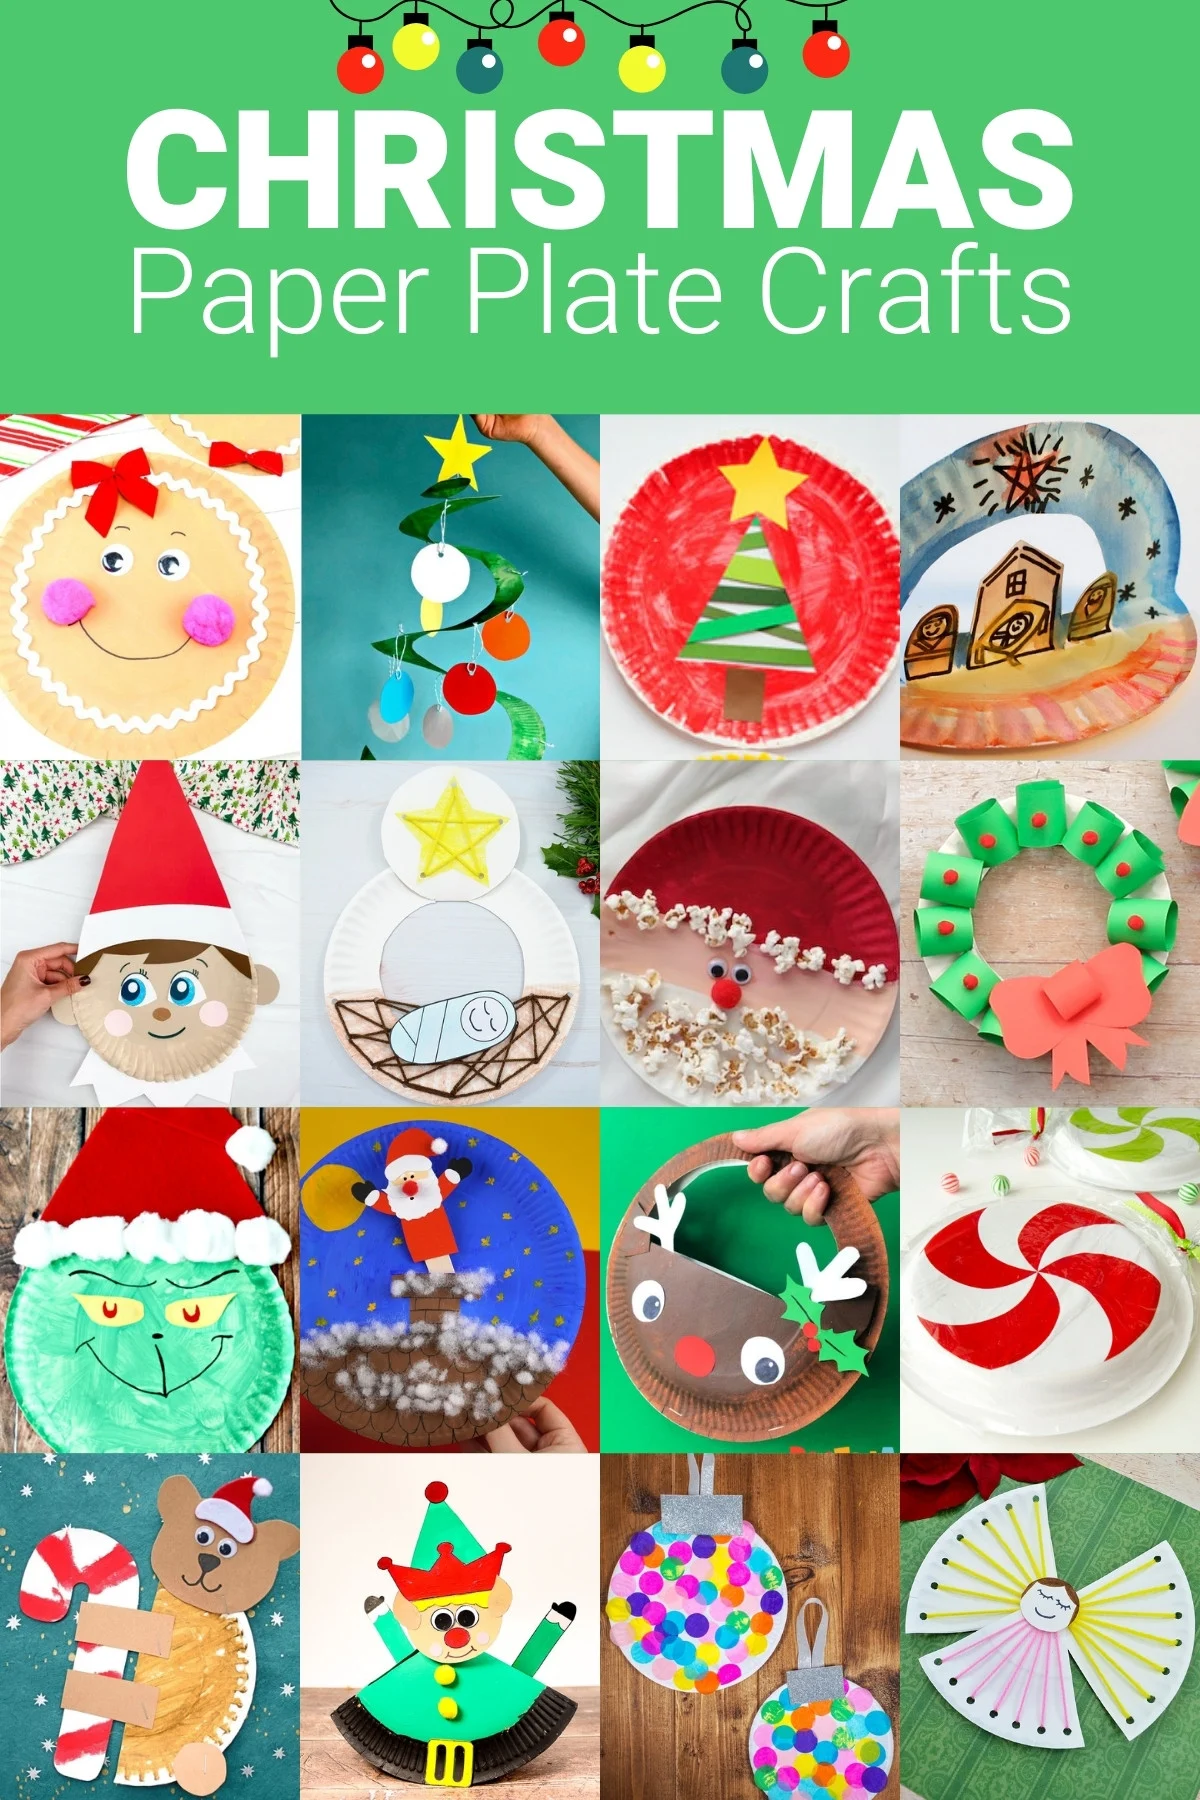 30+ Christmas Crafts for Kids - Natural Beach Living